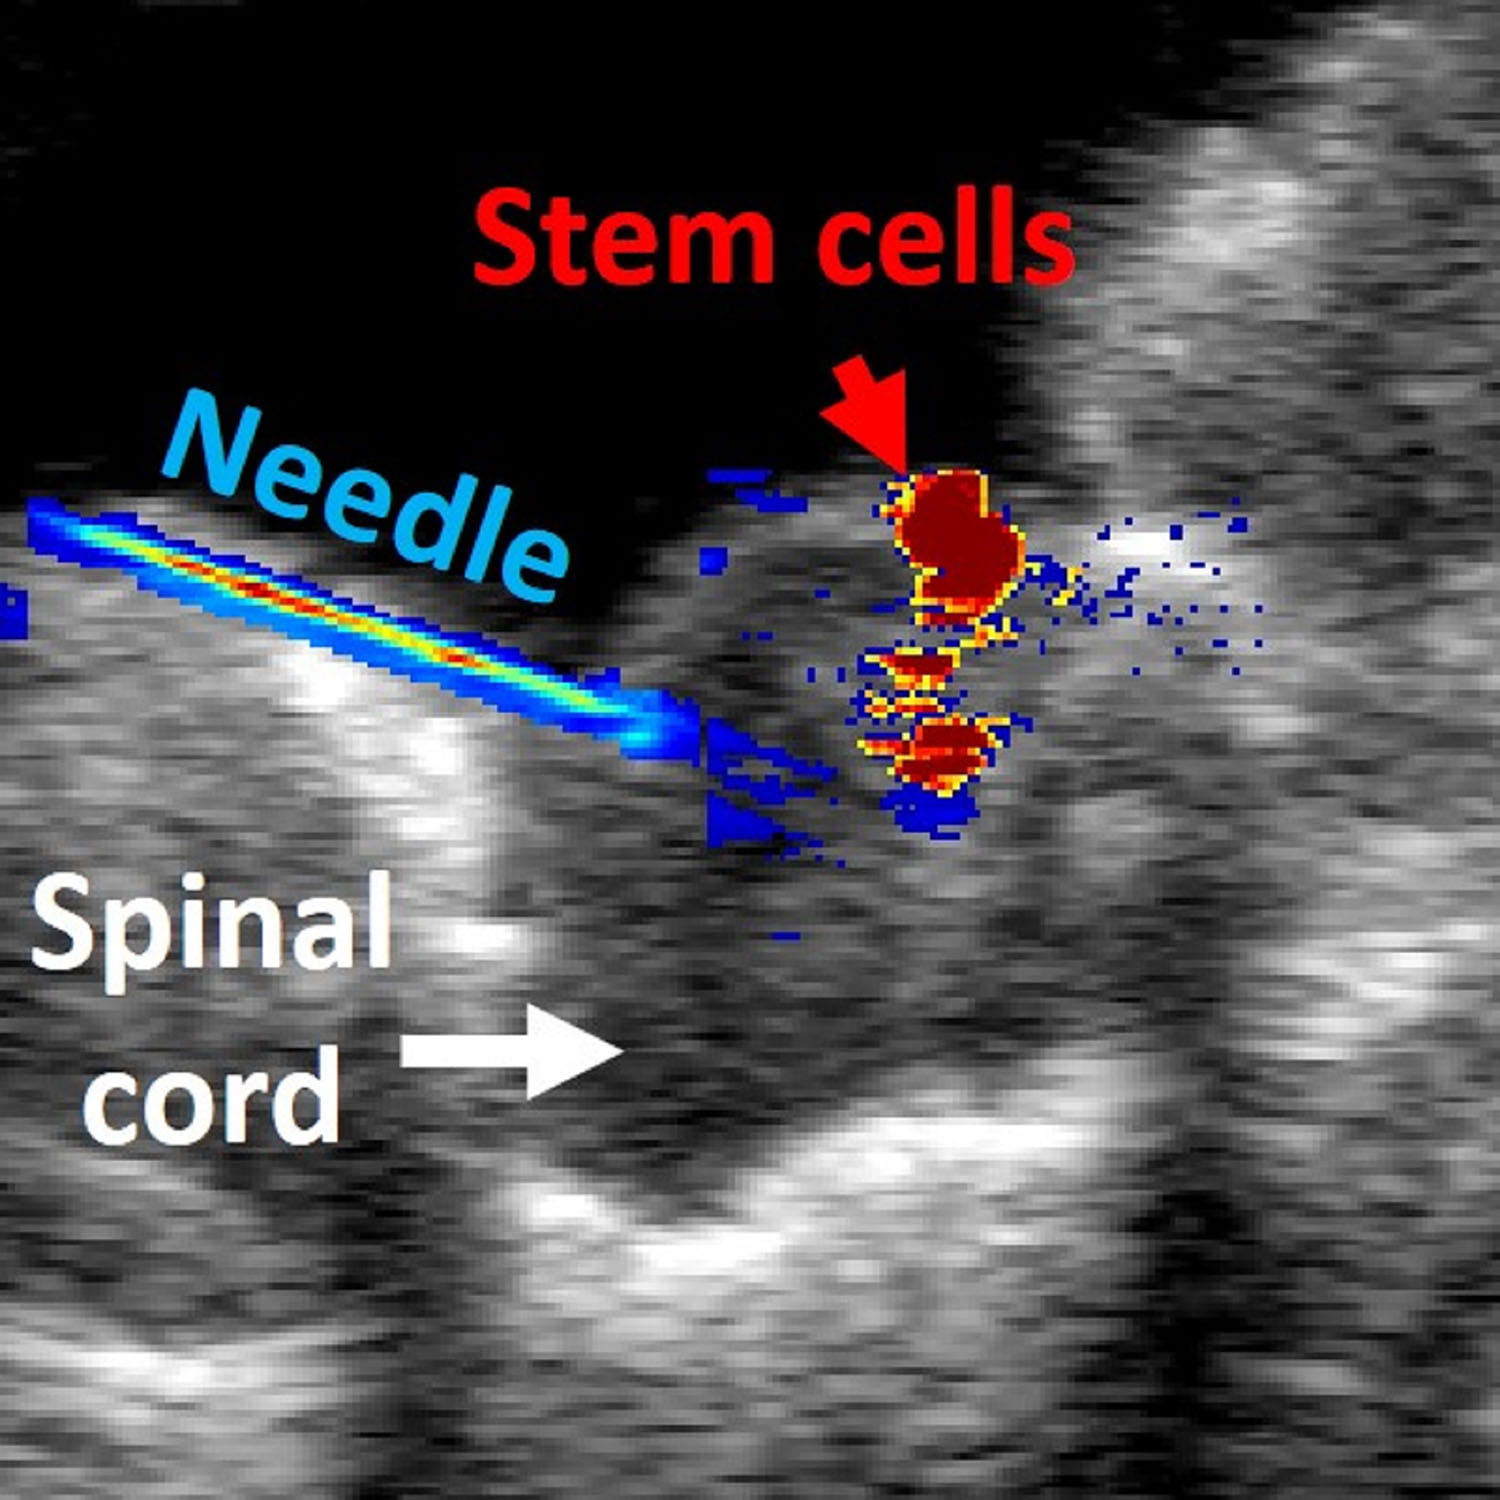 Guiding and Monitoring Stem Cell Therapies in Spinal Cord